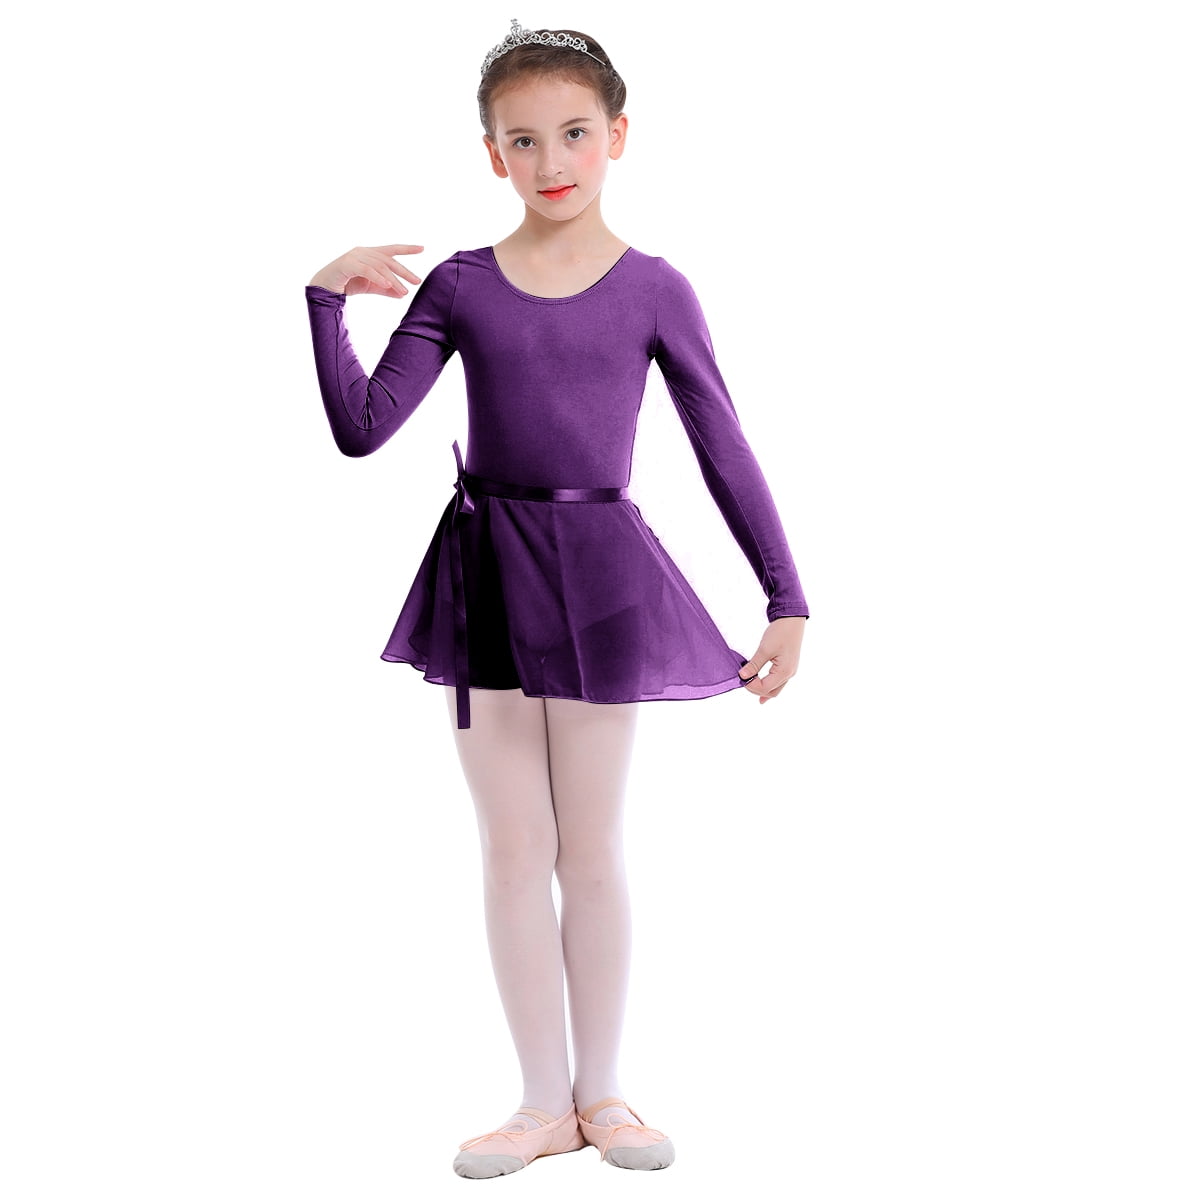 Infant Baby Girls Fashion Leather Skirt Kids Dance Performance Show Toddler